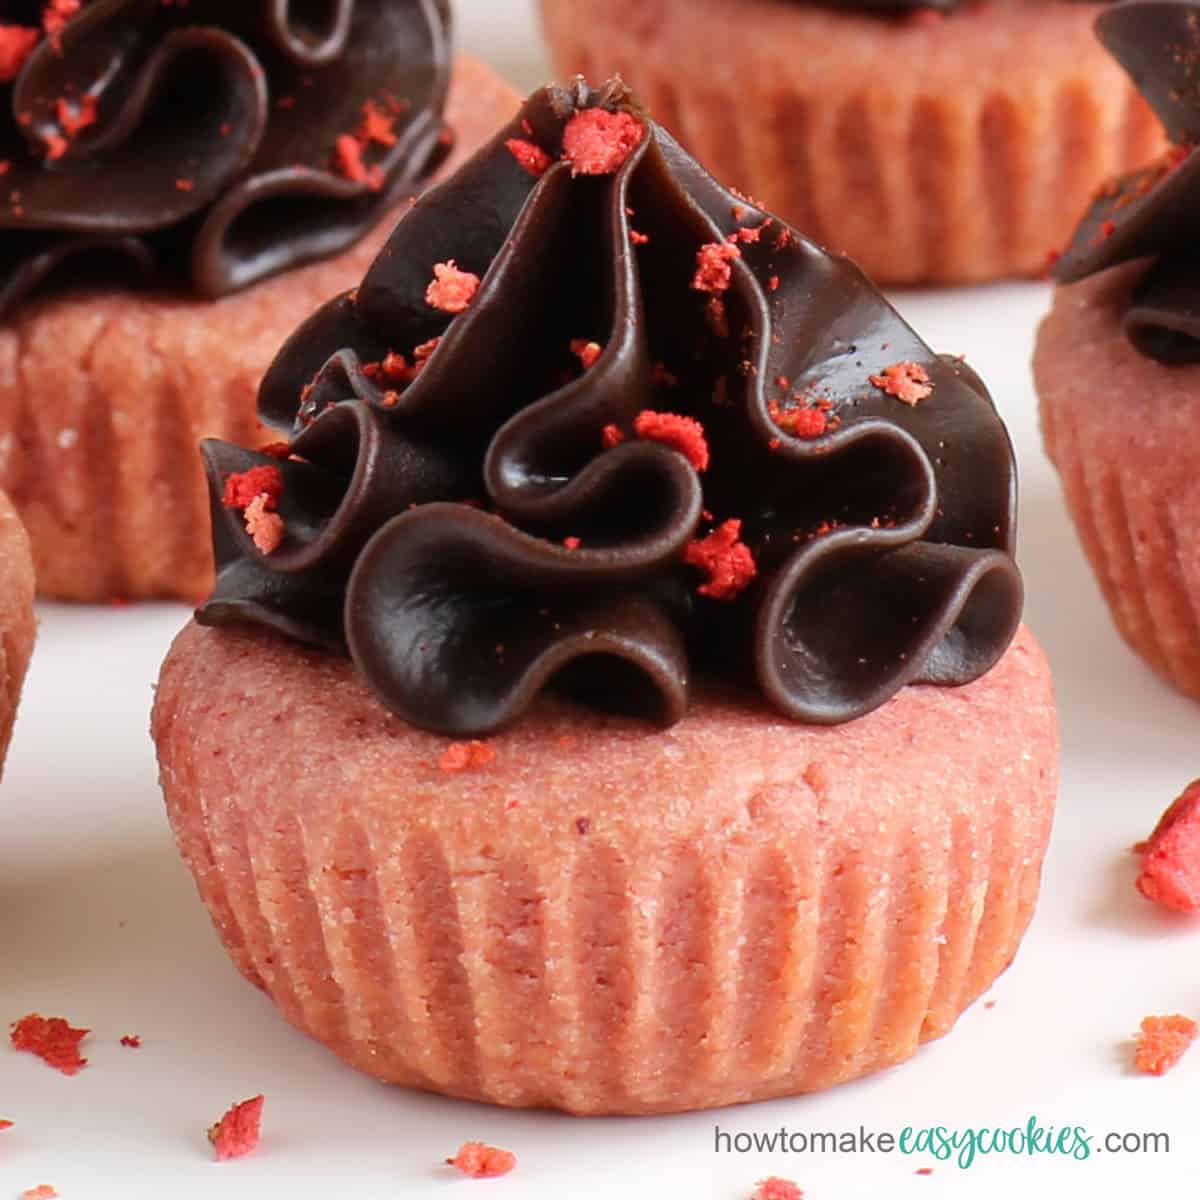 chocolate ganache frosting on strawberry cookie cups